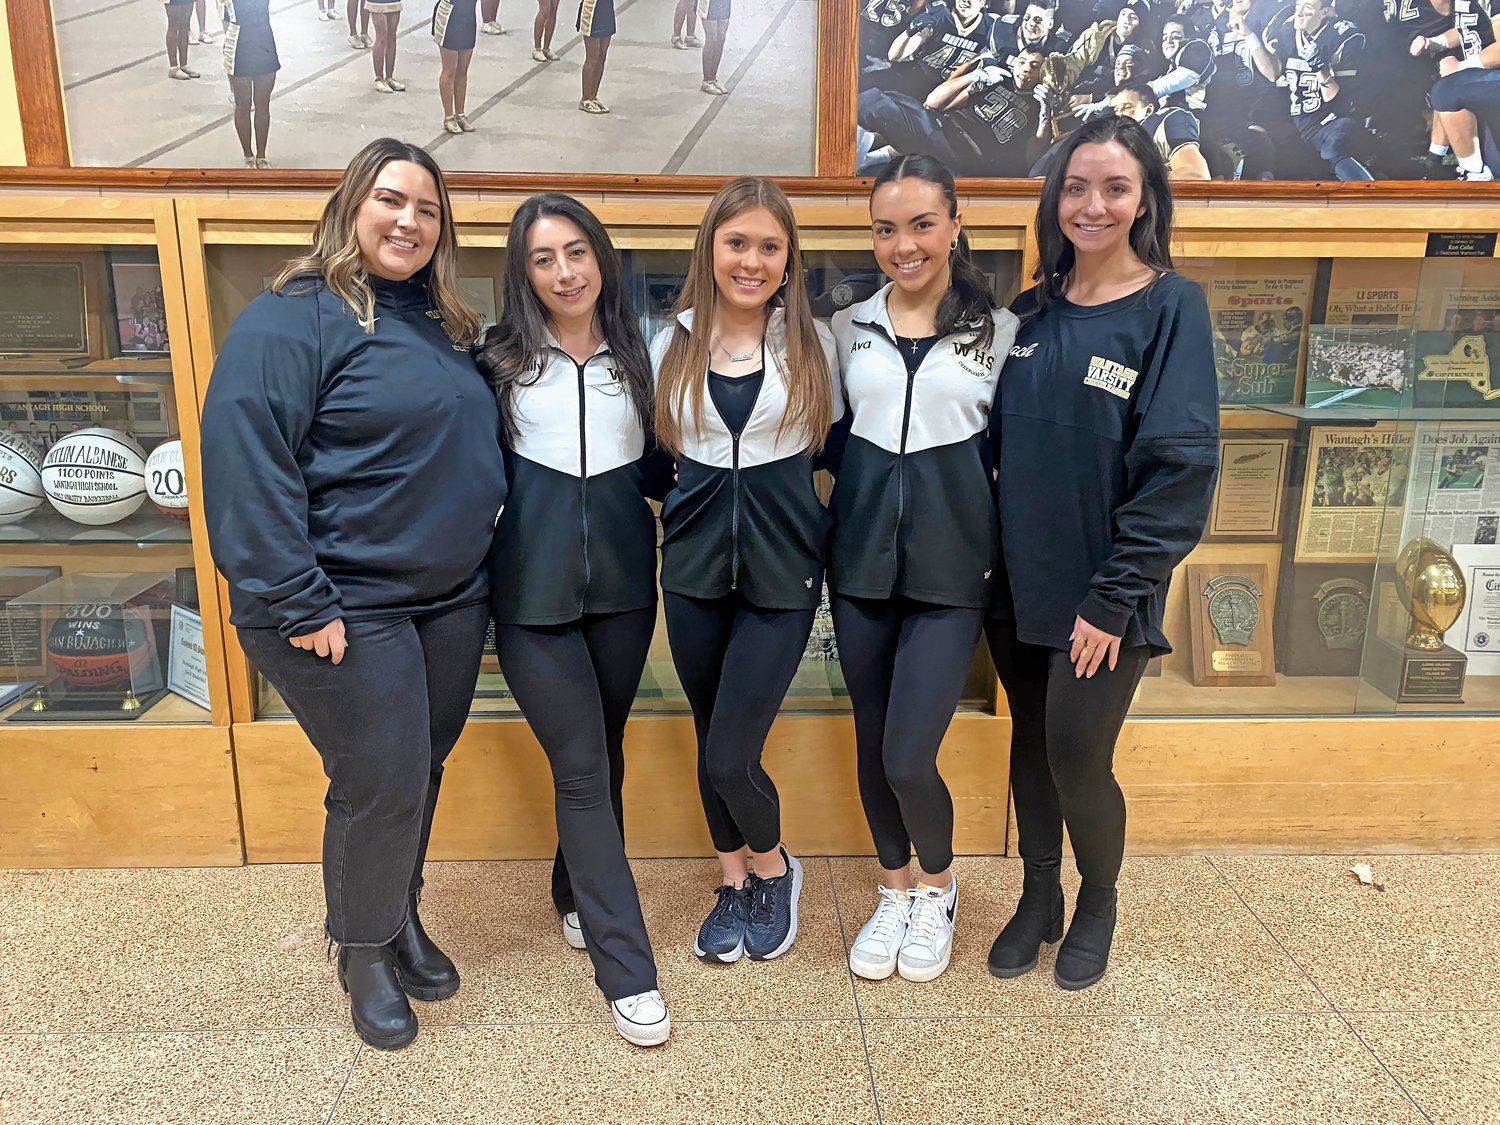 Katie Savage, far left, a Wantagh cheer coach, with senior captains Emily Drago, Jessica Balkunas and Ava Lombardo, and coach Jaclyn Bonlarron. All are heading to nationals in Florida.